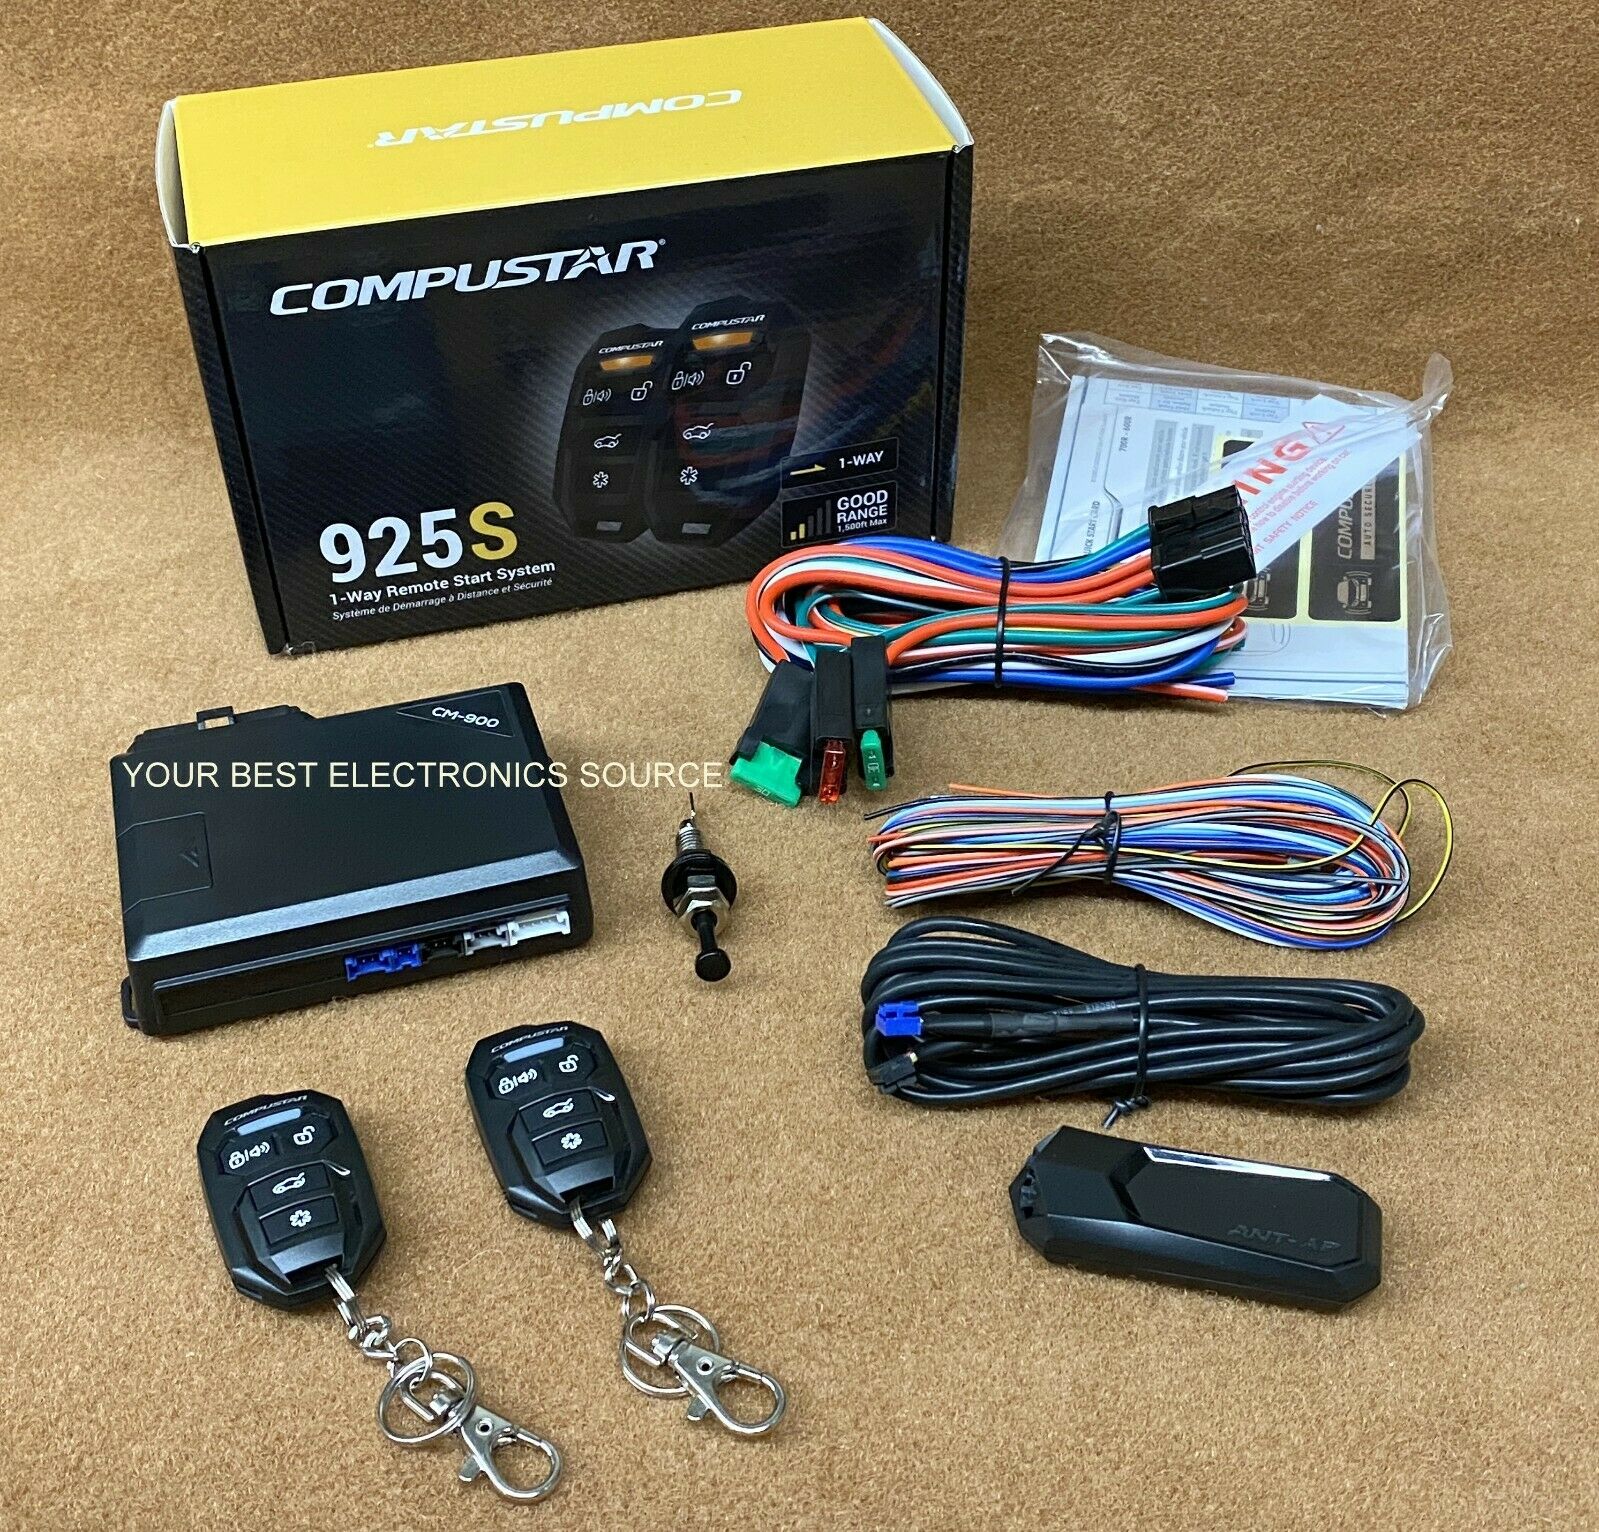 NEW Compustar CS925-S 1-Way Remote Start System w/ Two 4-Button Remotes